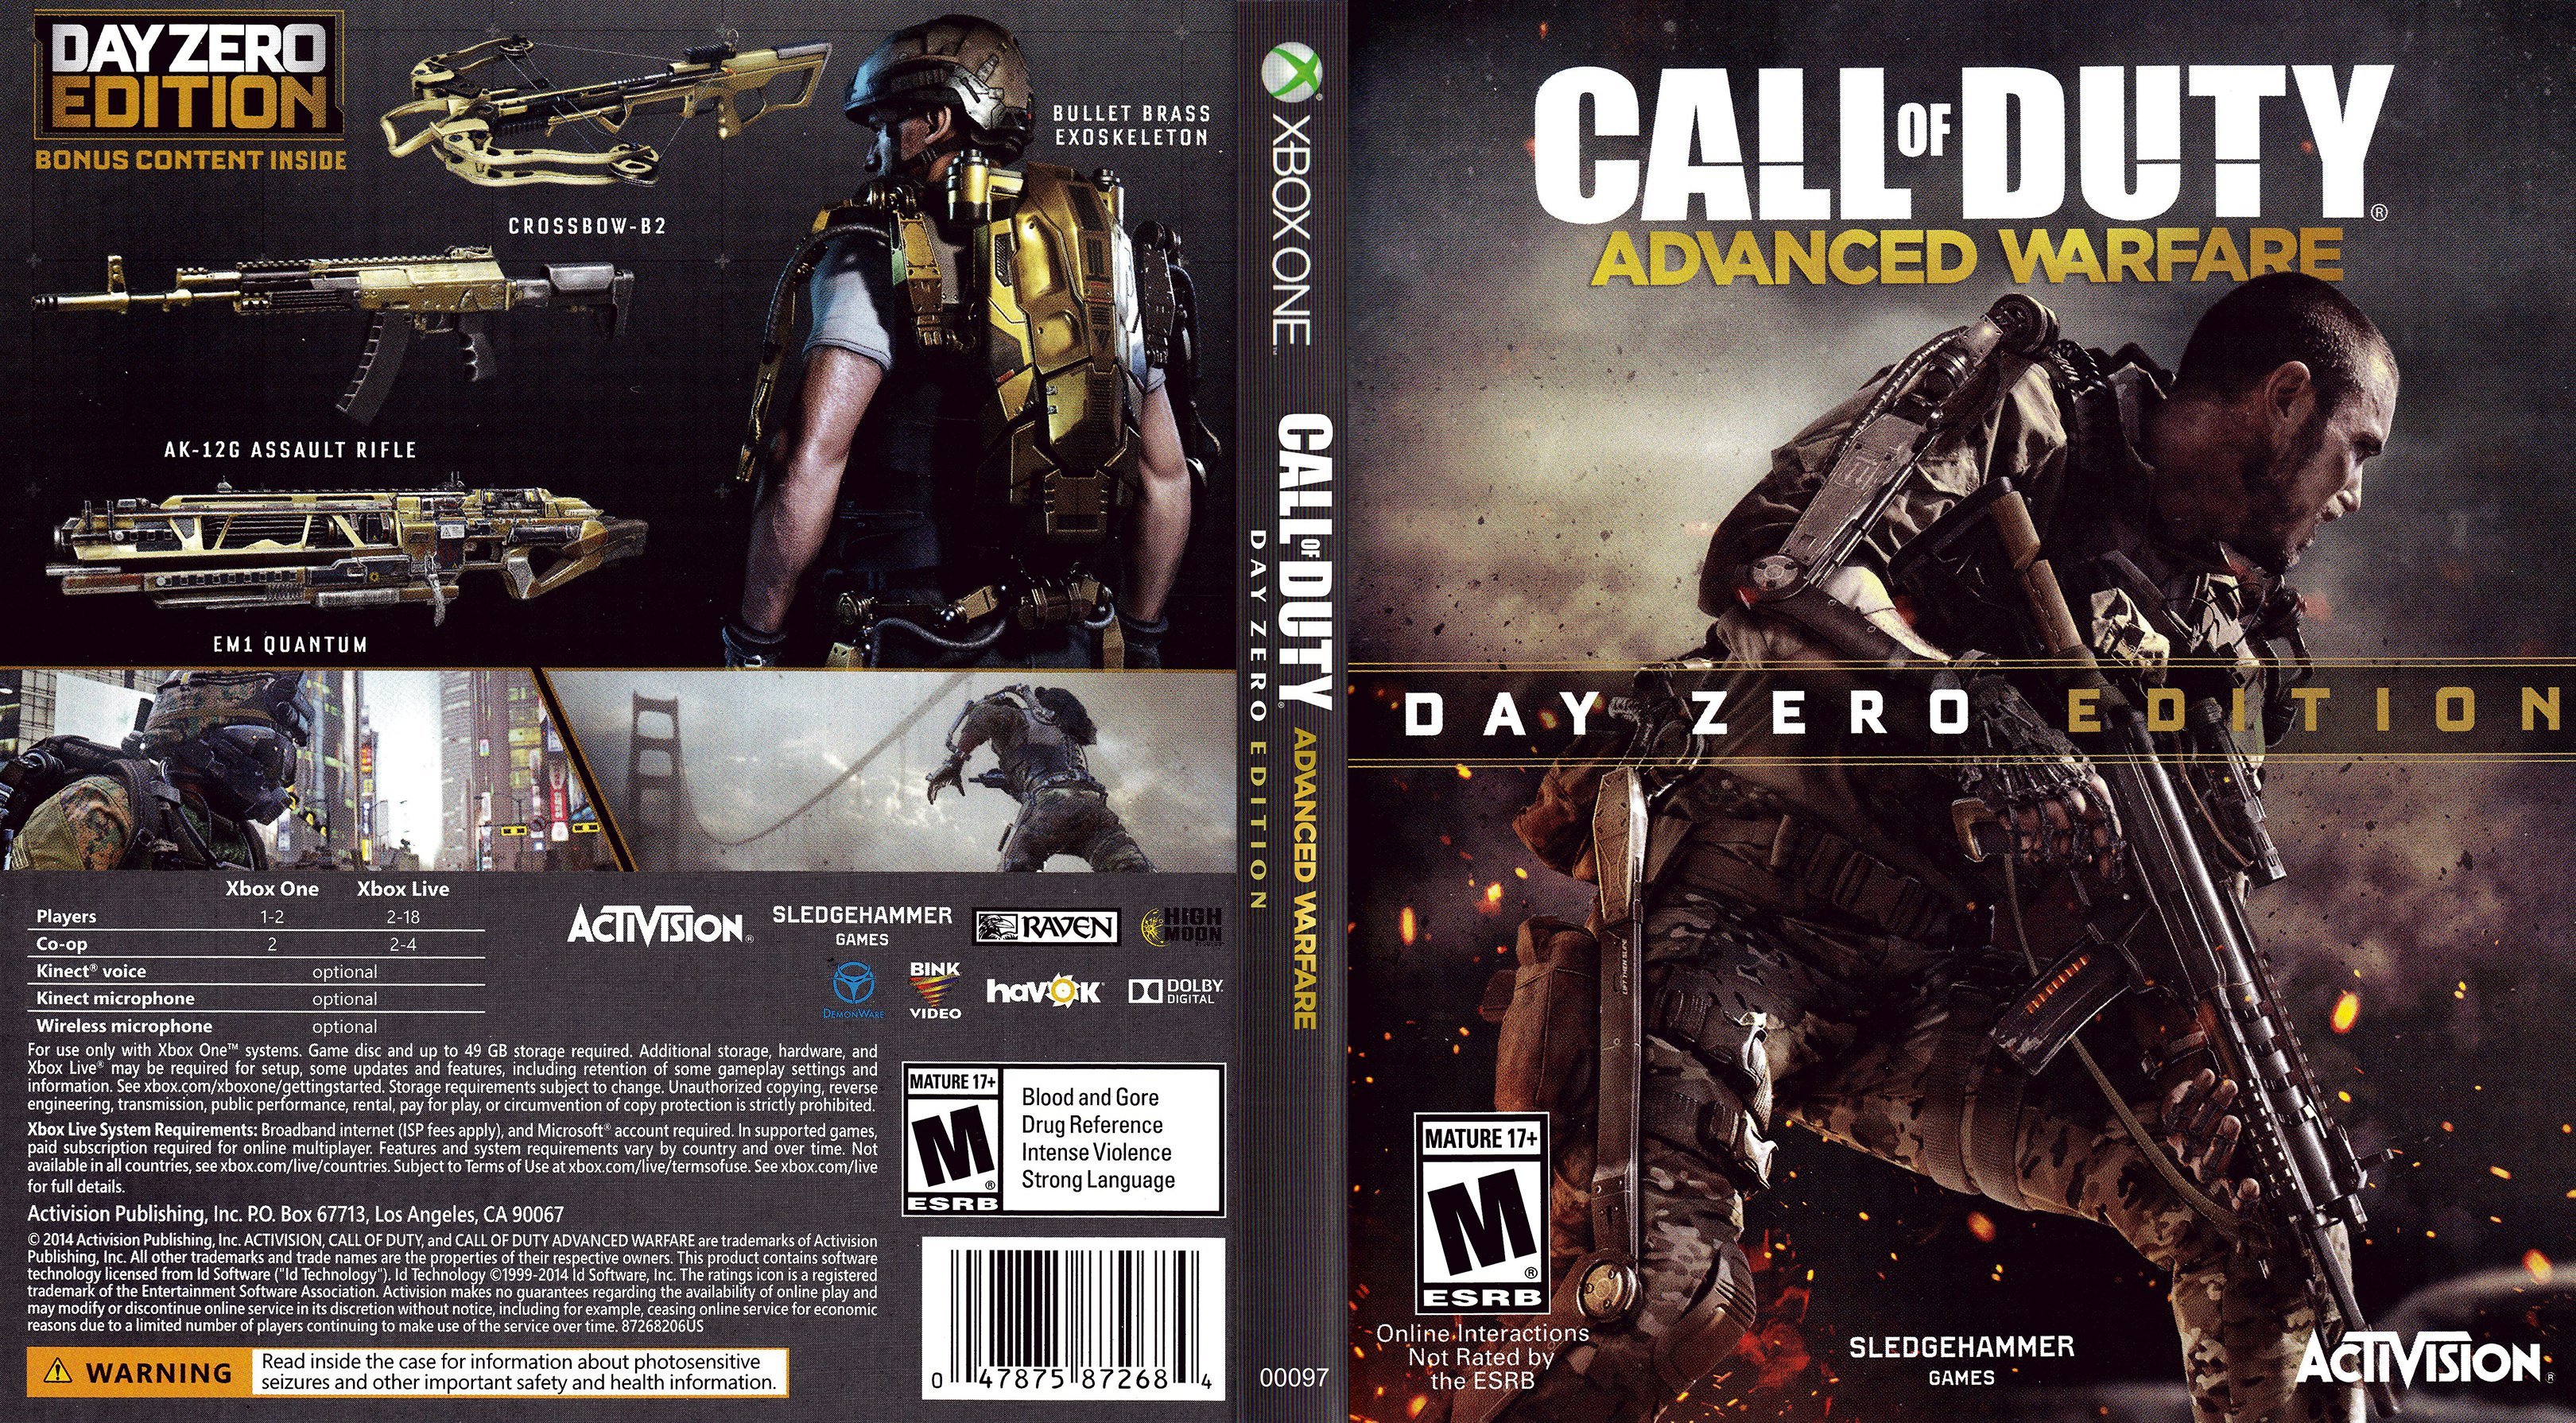 Call of duty adventure. Call of Duty: Advanced Warfare (2014). Call of Duty®: Advanced Warfare Gold Edition Xbox one. Call of Duty Advanced Warfare Day Zero Edition ps4 диск. Обложка Xbox one Call of Duty Advanced Warfare Xbox one.